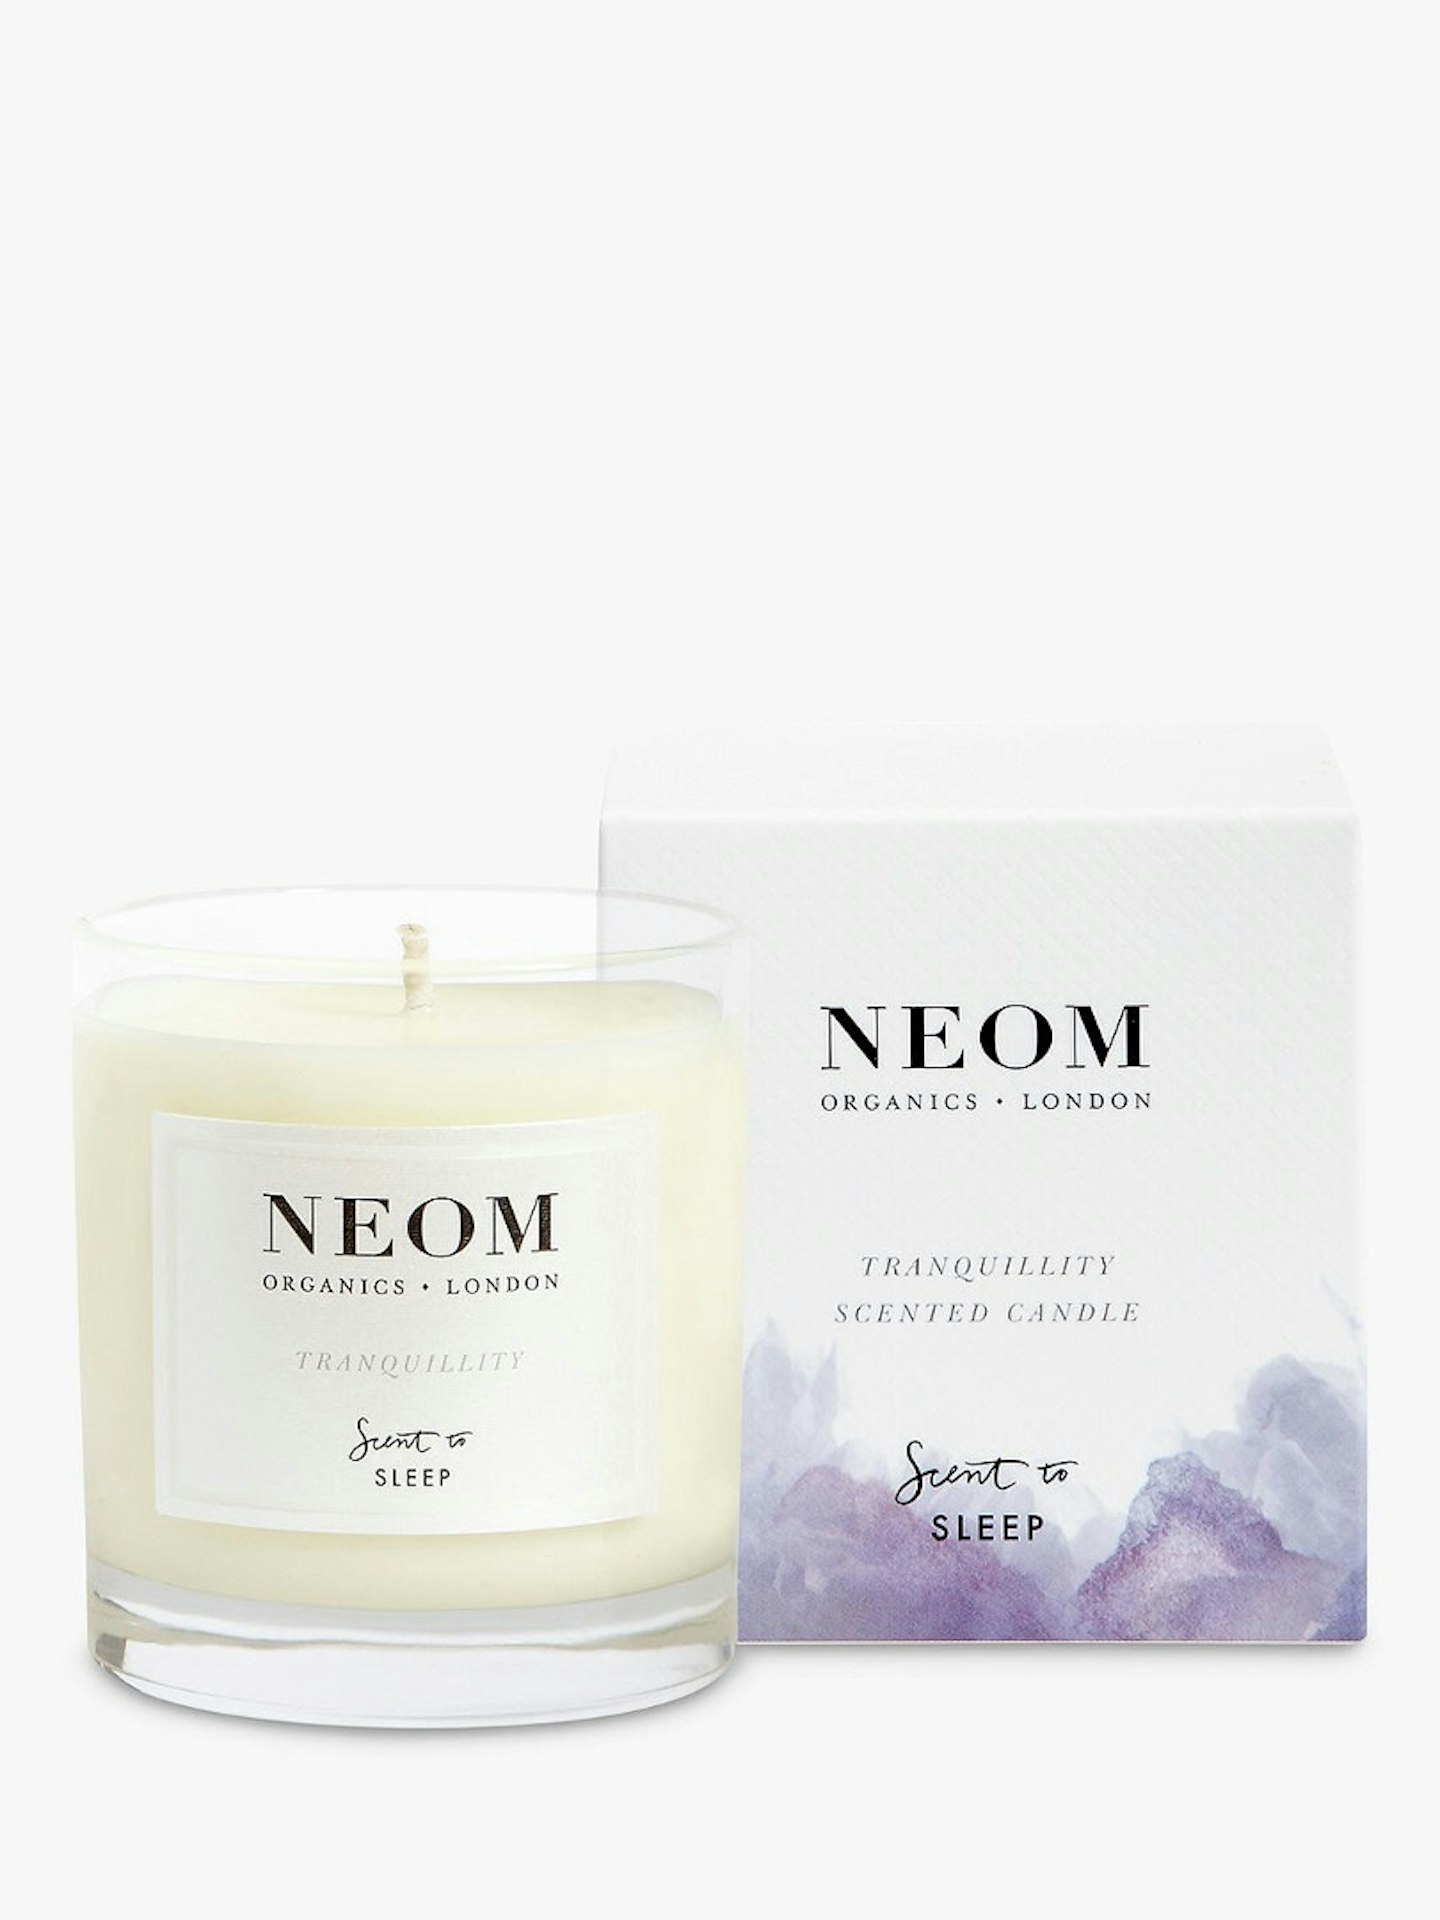 Neom, Organics London Tranquility Standard Scented Candle, £32